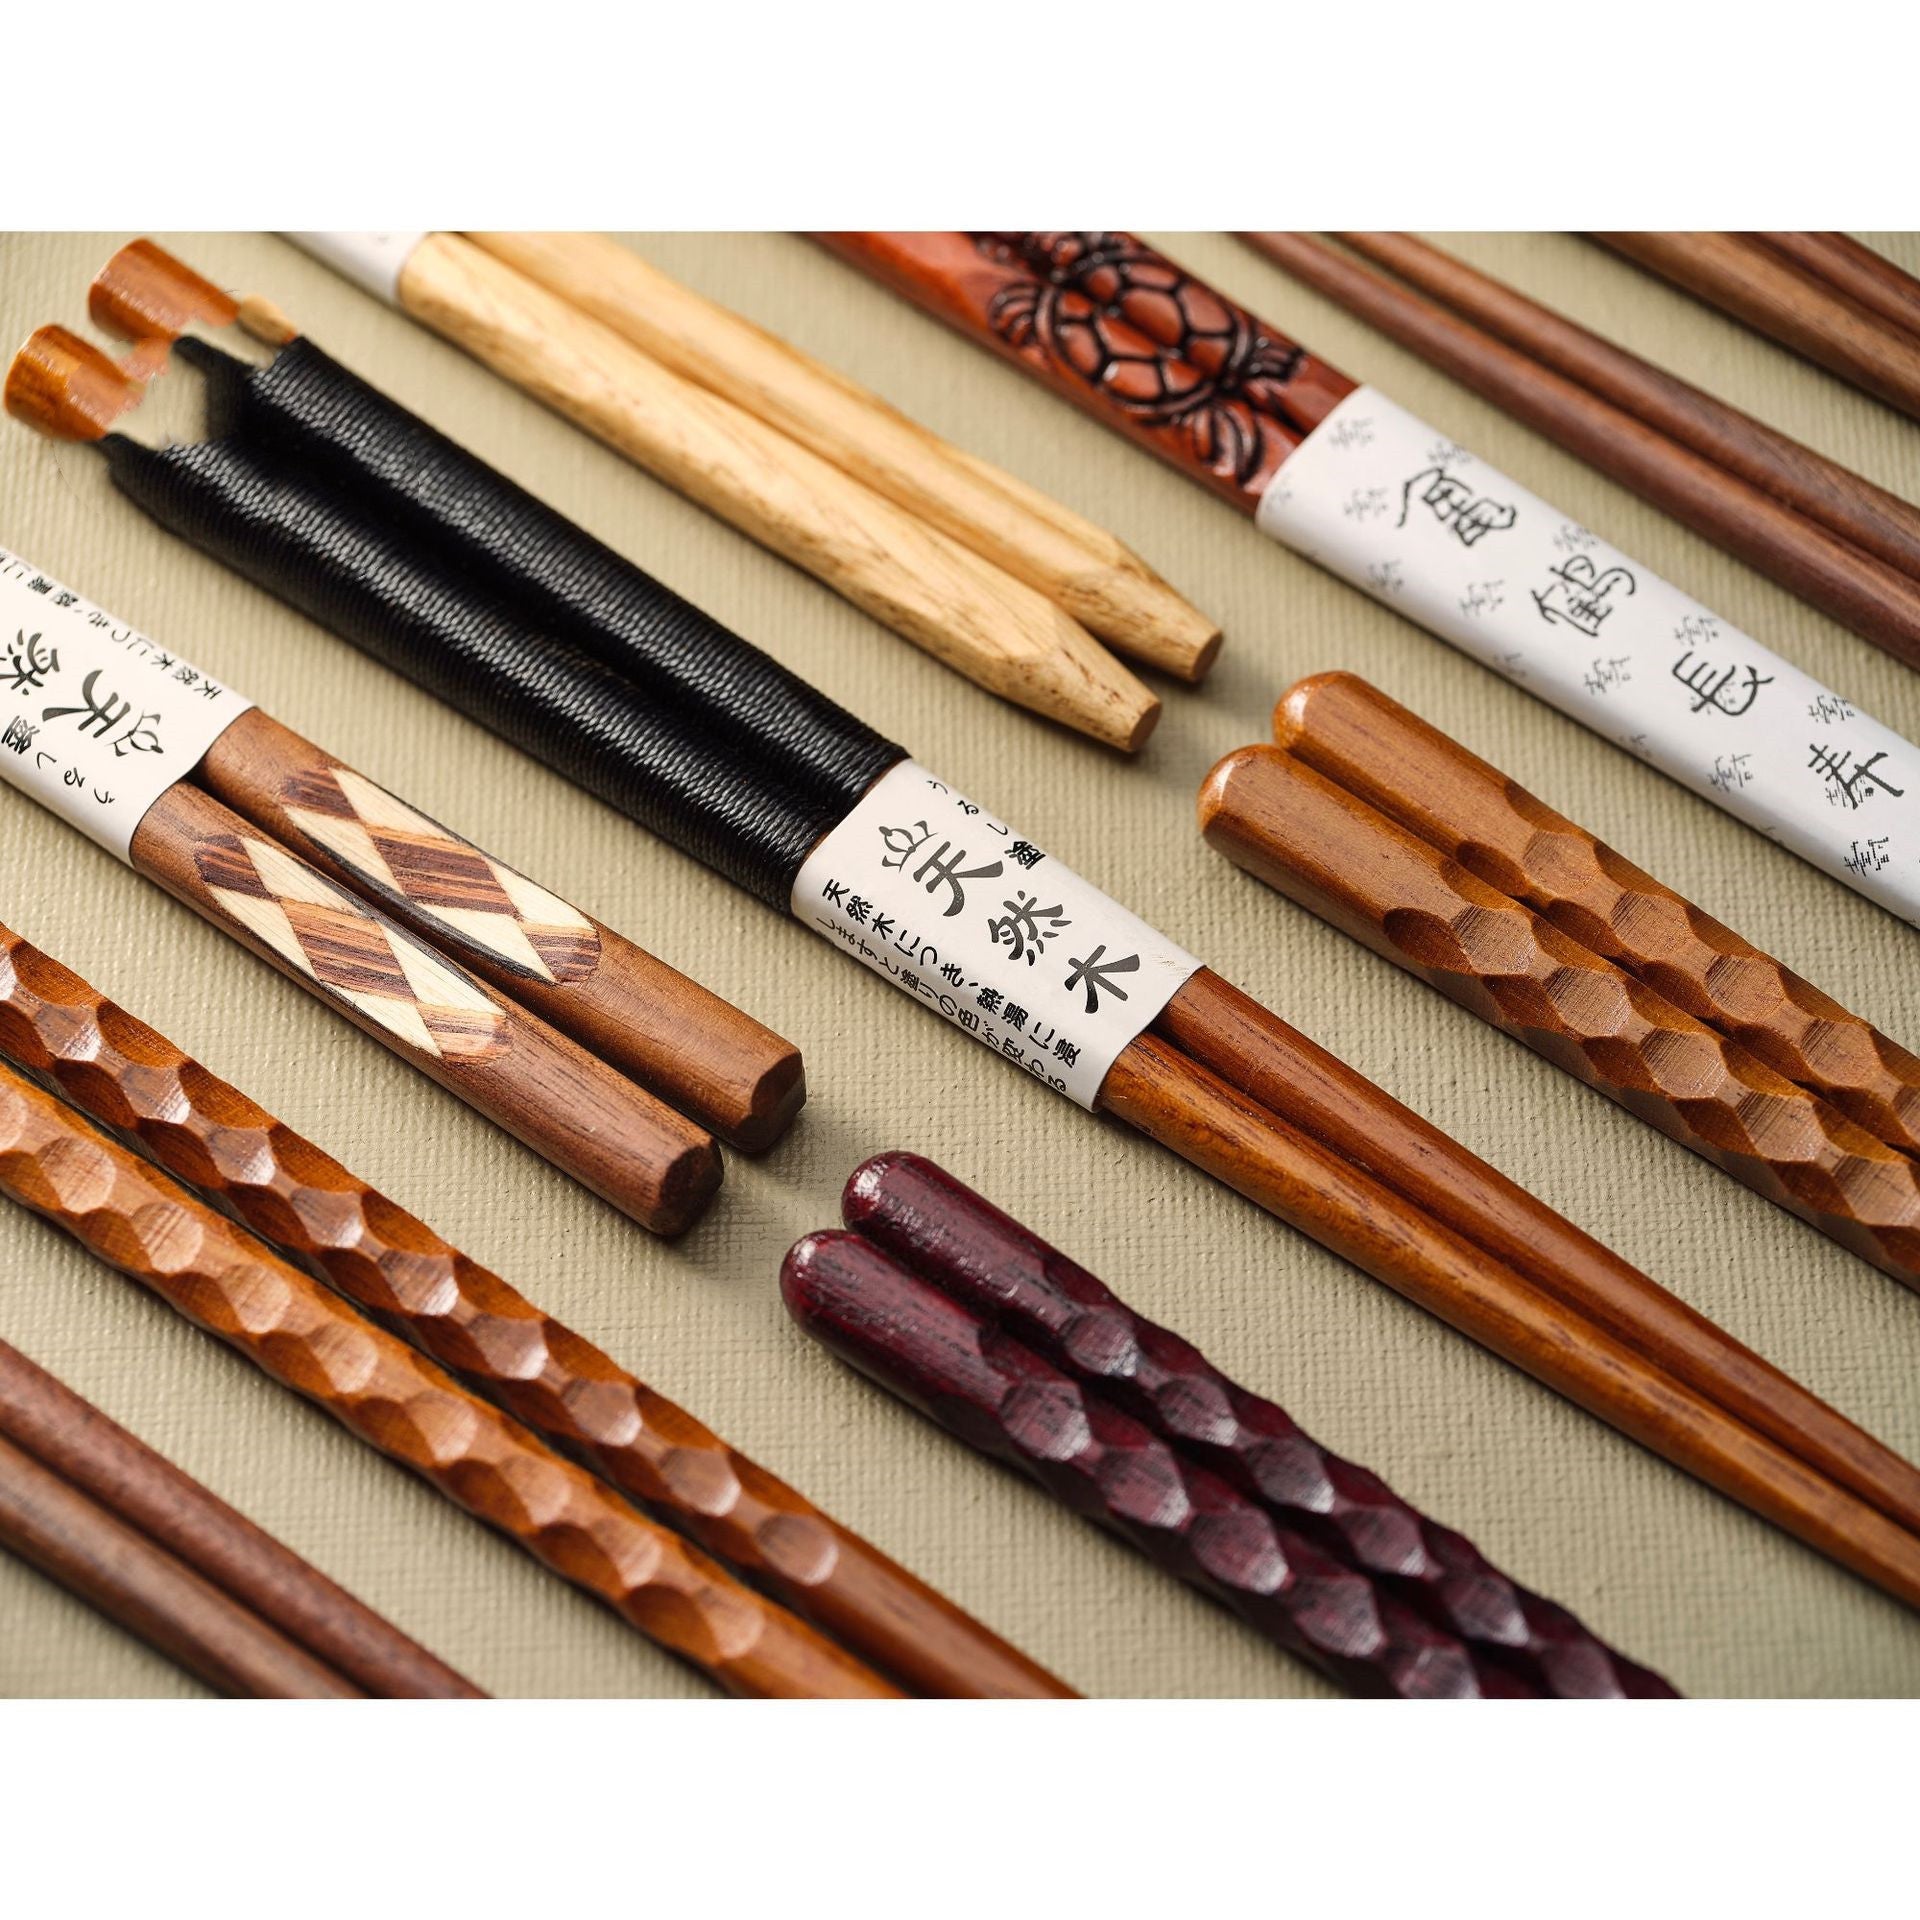 Japanese Wooden Chopsticks With Carvings And Colours | Spoon Set, Natural wooden, Chopsticks, Chopstick Rest - HomeDecor -